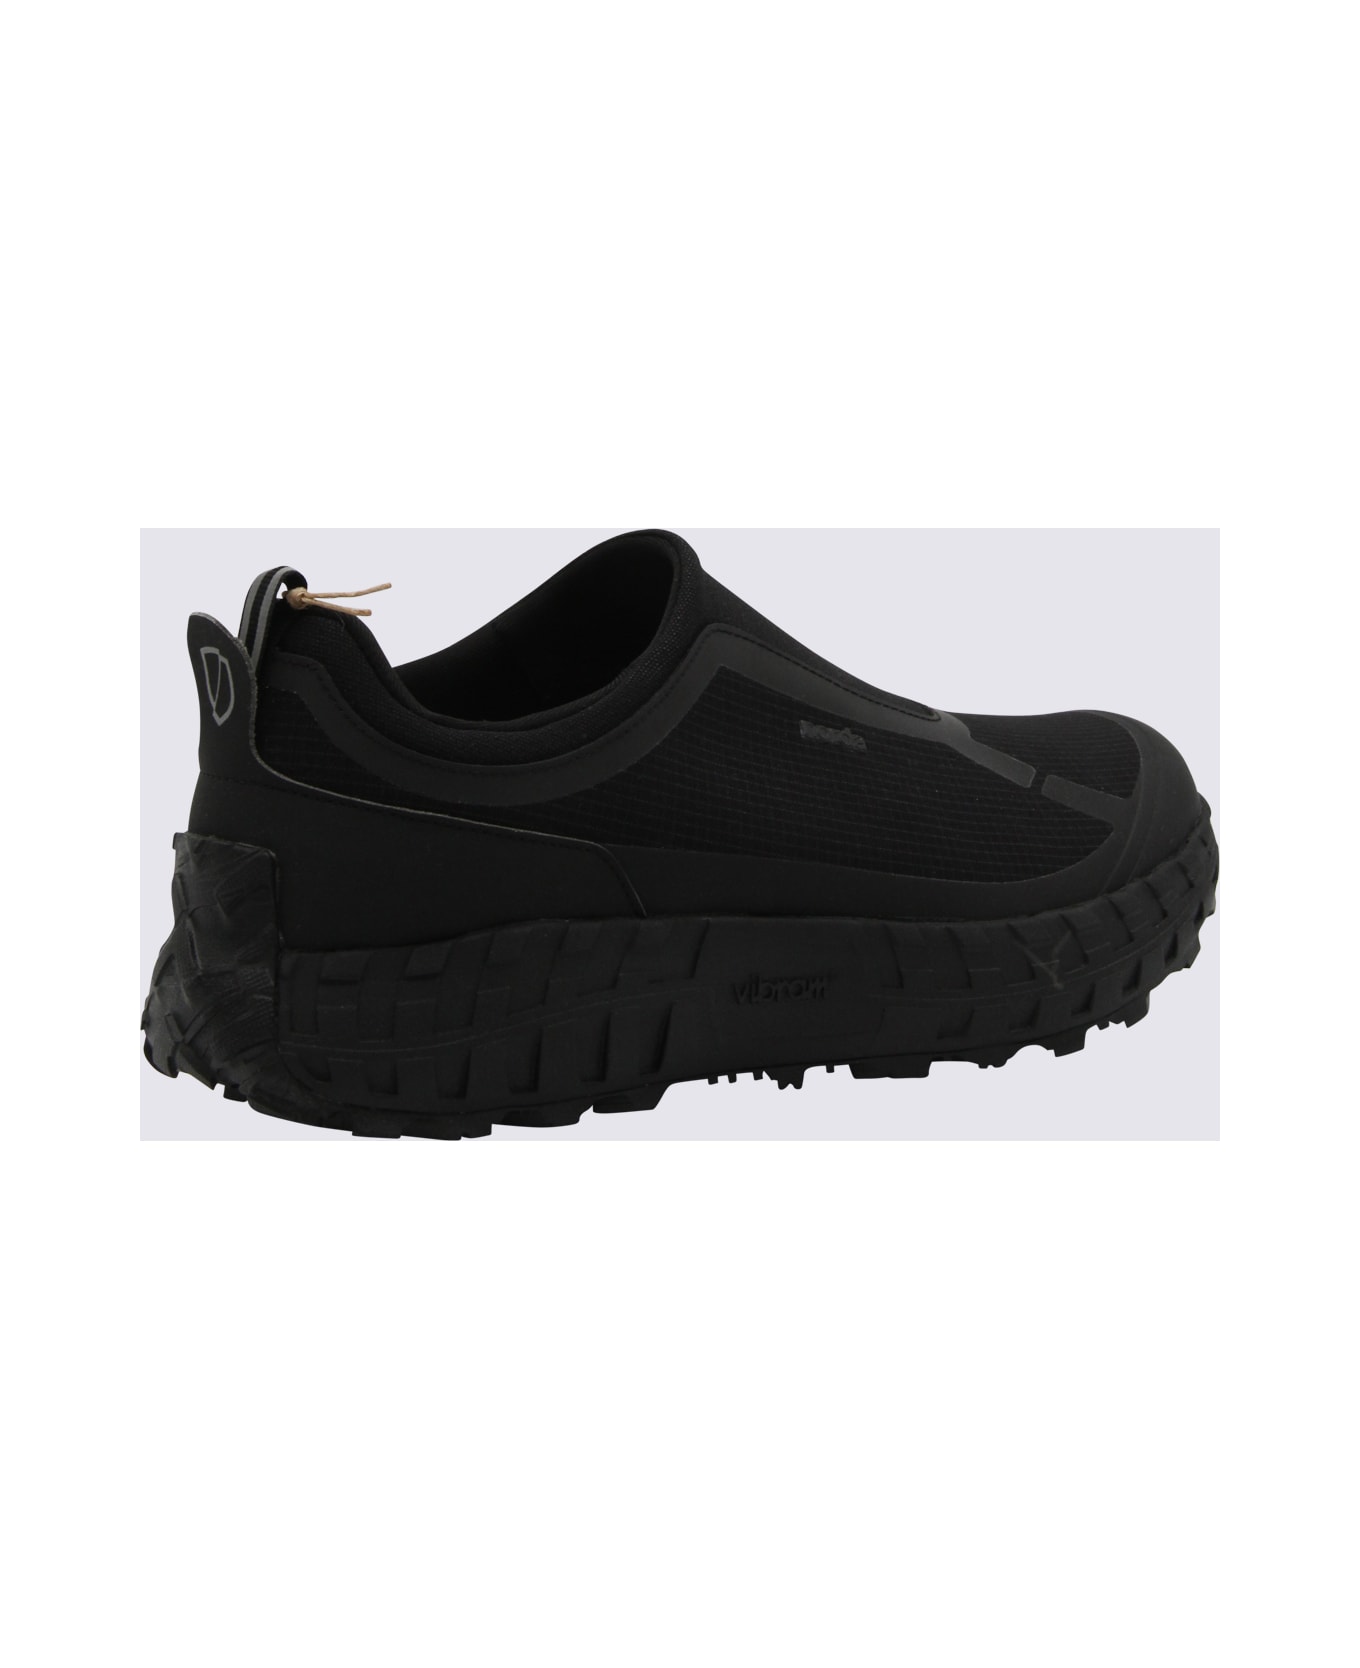 Norda Black The 003 M Pitch Sneakers - Black